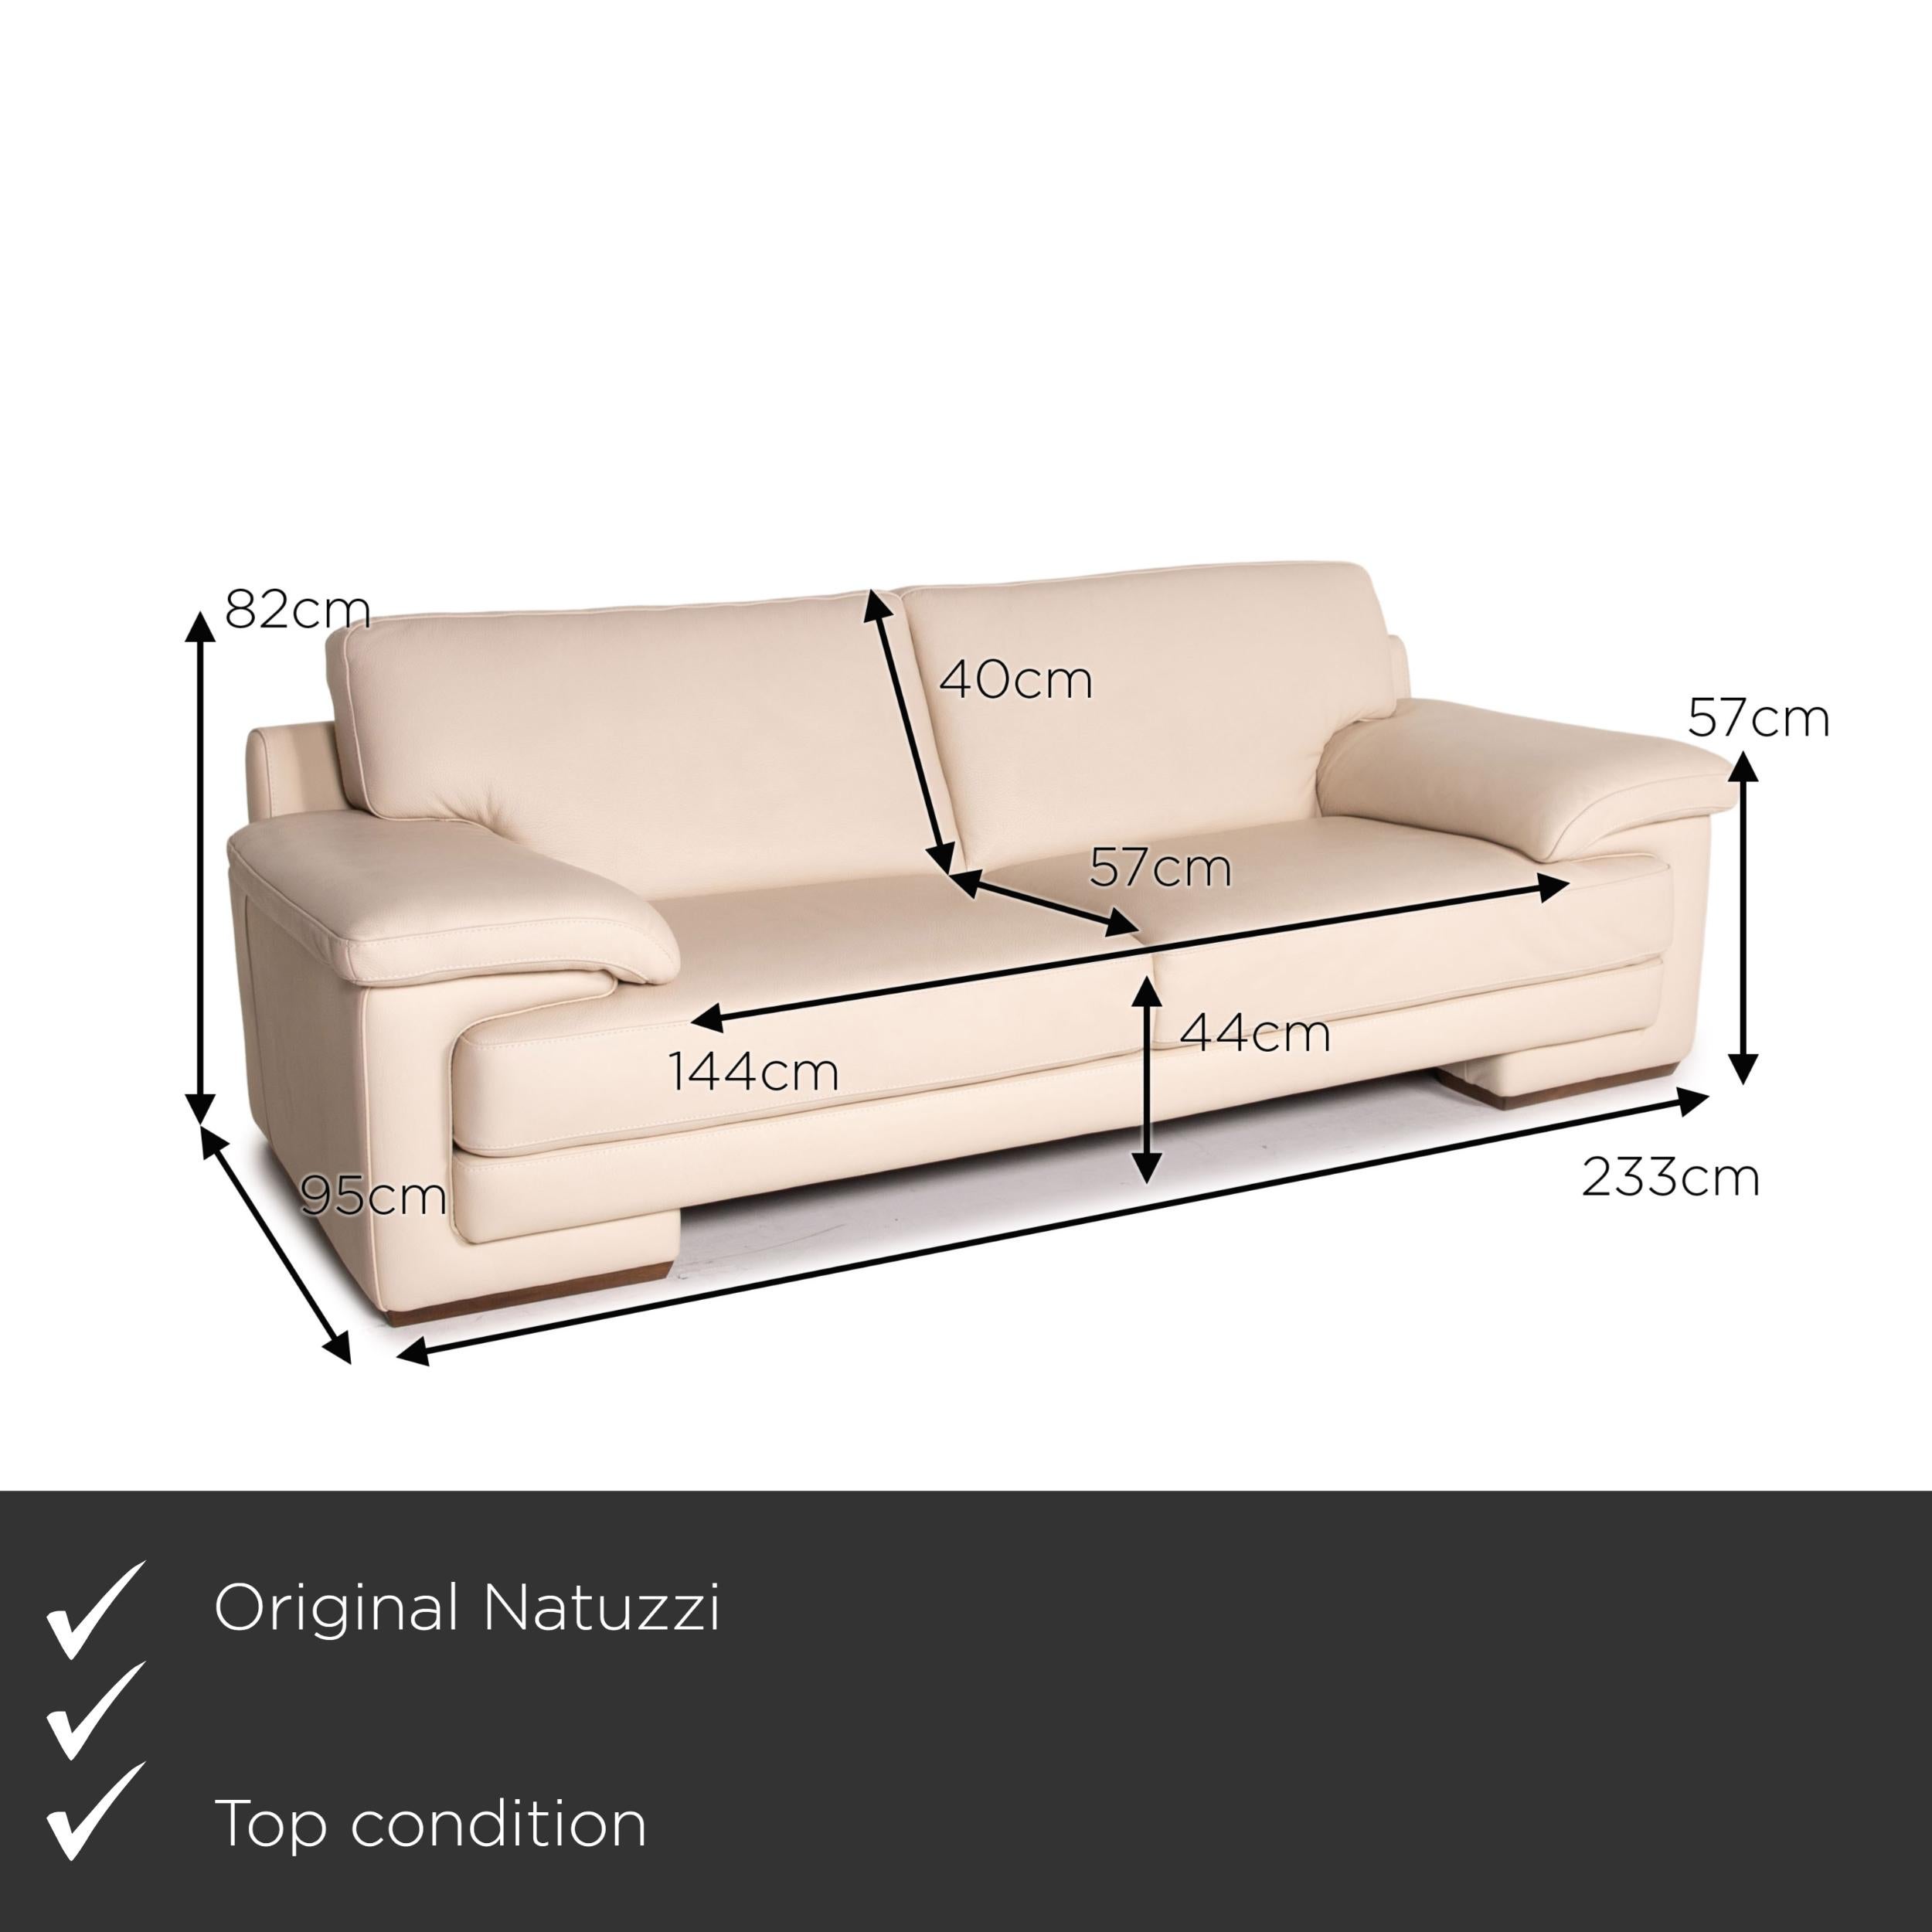 We present to you a Natuzzi 2198 leather sofa cream three-seater couch.


 Product measurements in centimeters:
 

Depth: 95
Width: 233
Height: 82
Seat height: 44
Rest height: 57
Seat depth: 57
Seat width: 144
Back height: 40.
 